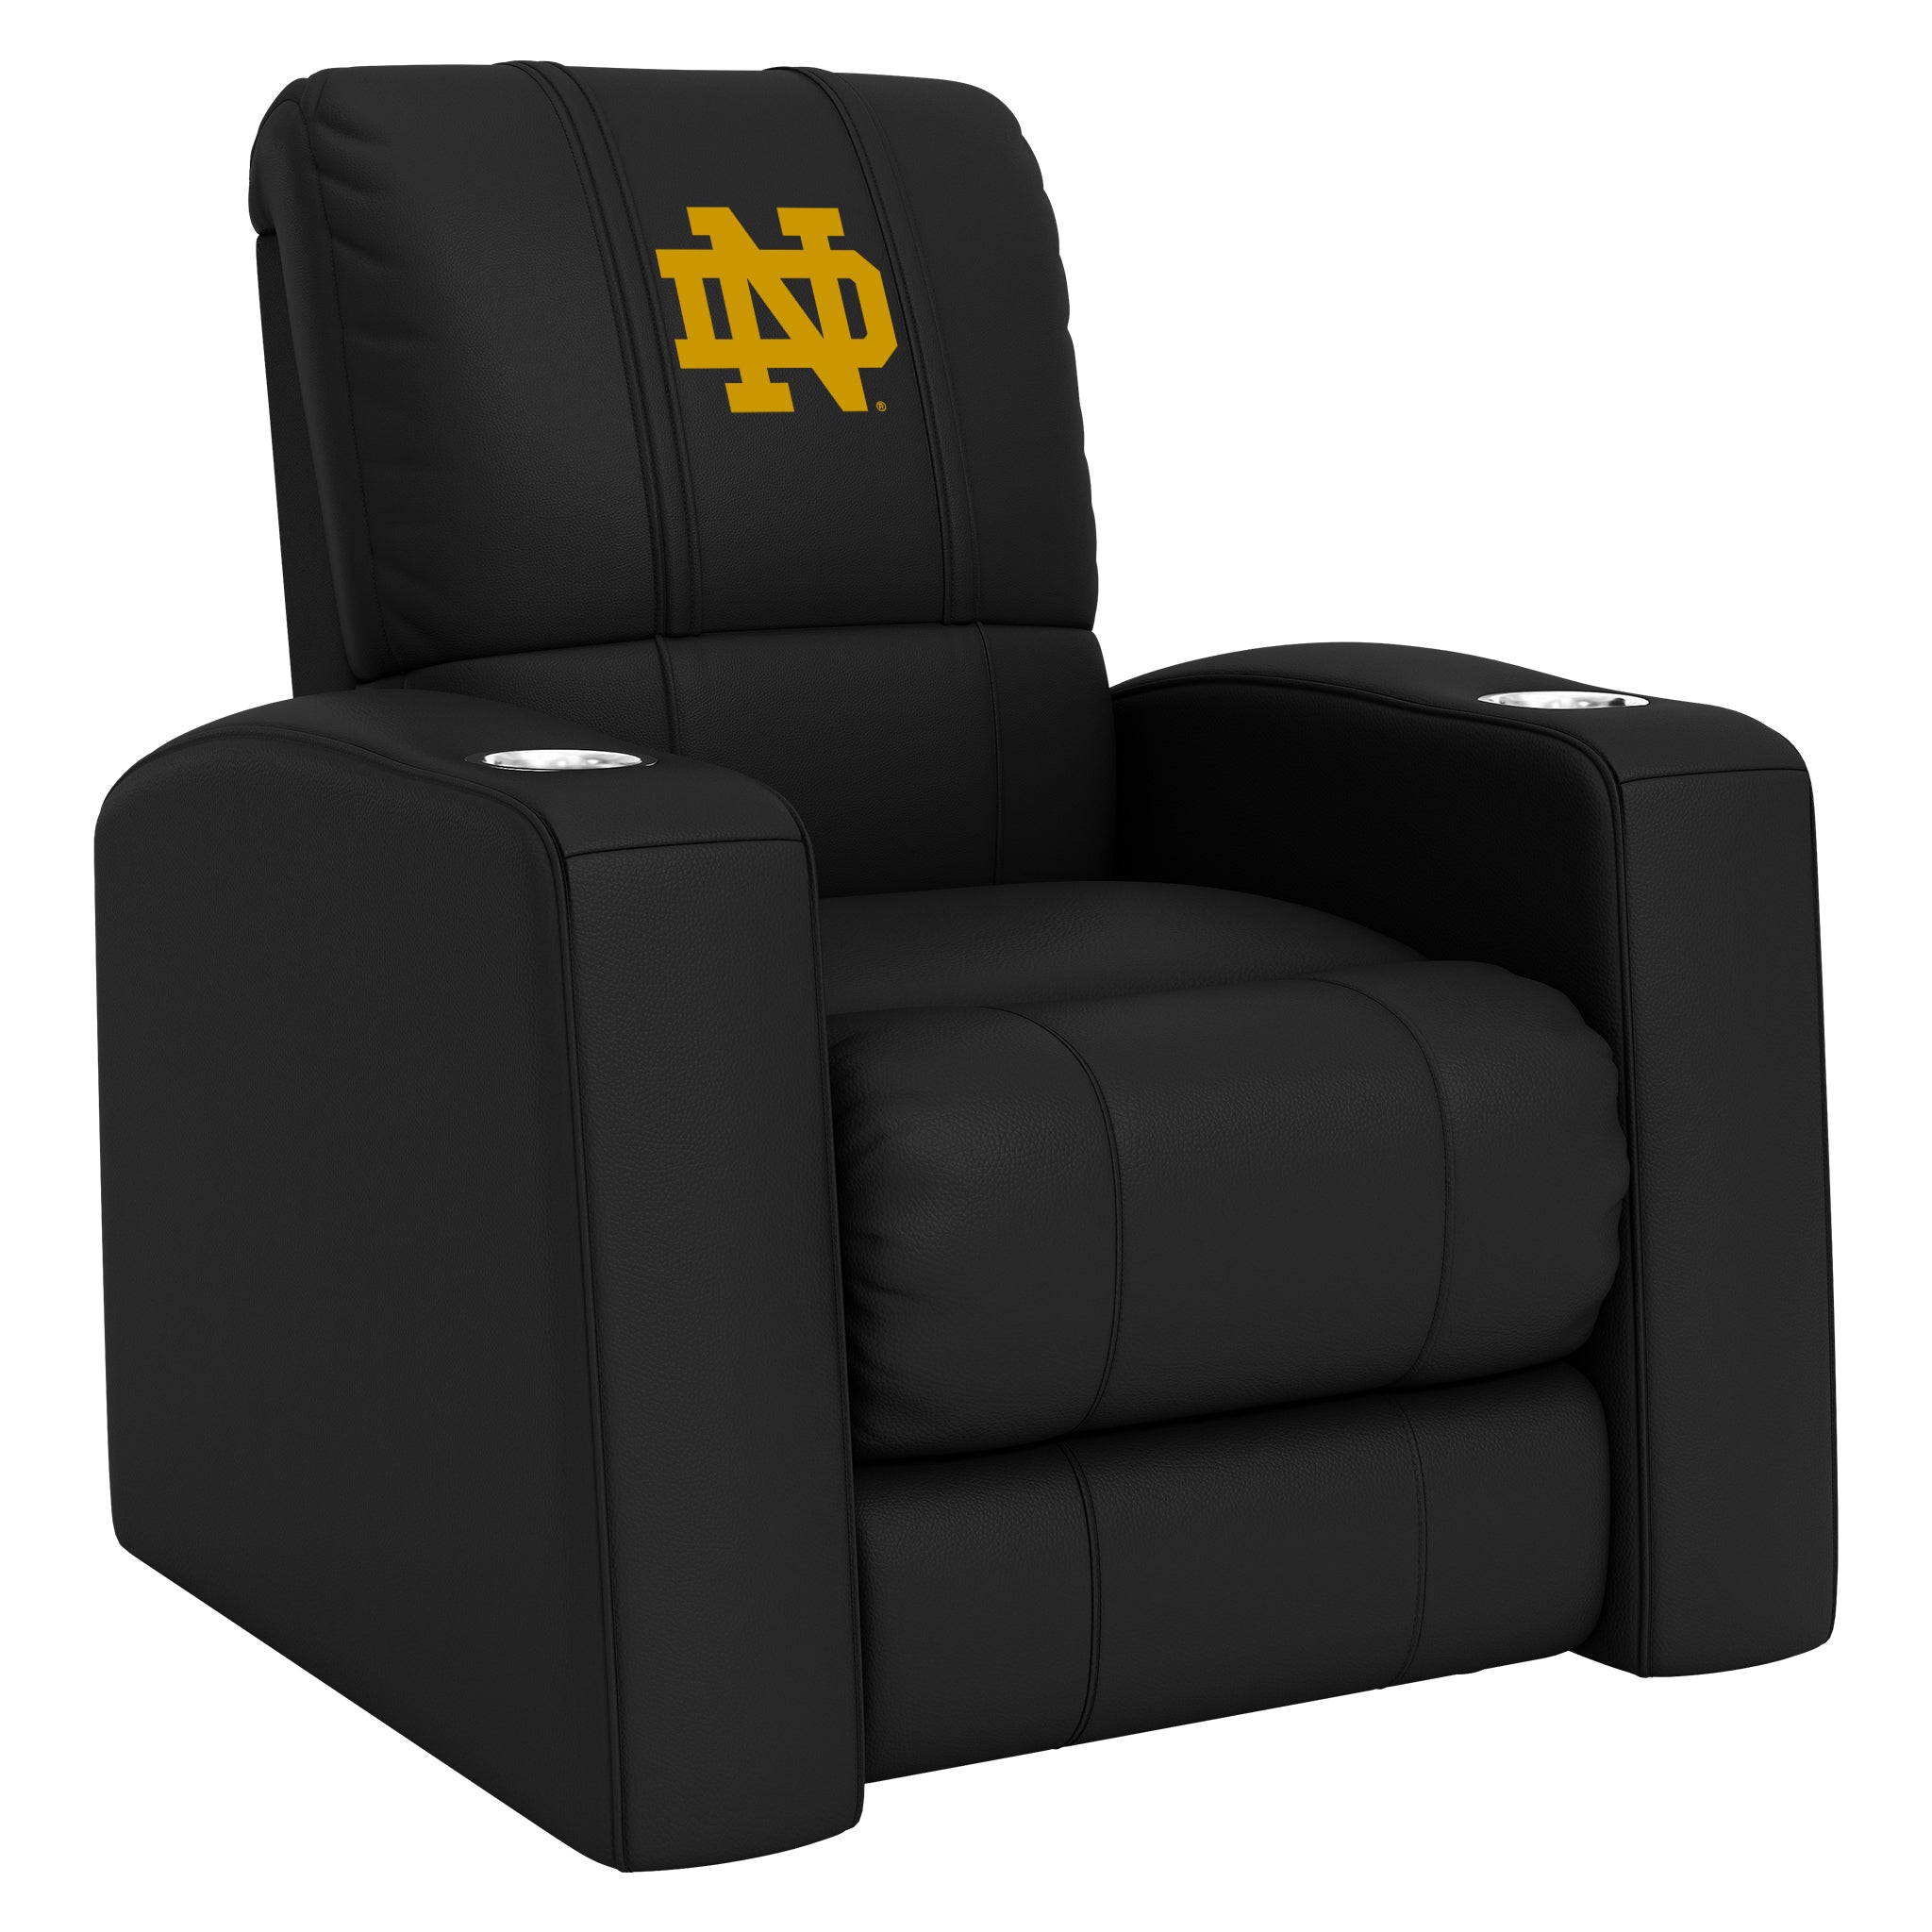 Notre Dame Home Theater Recliner with Notre Dame Primary Logo